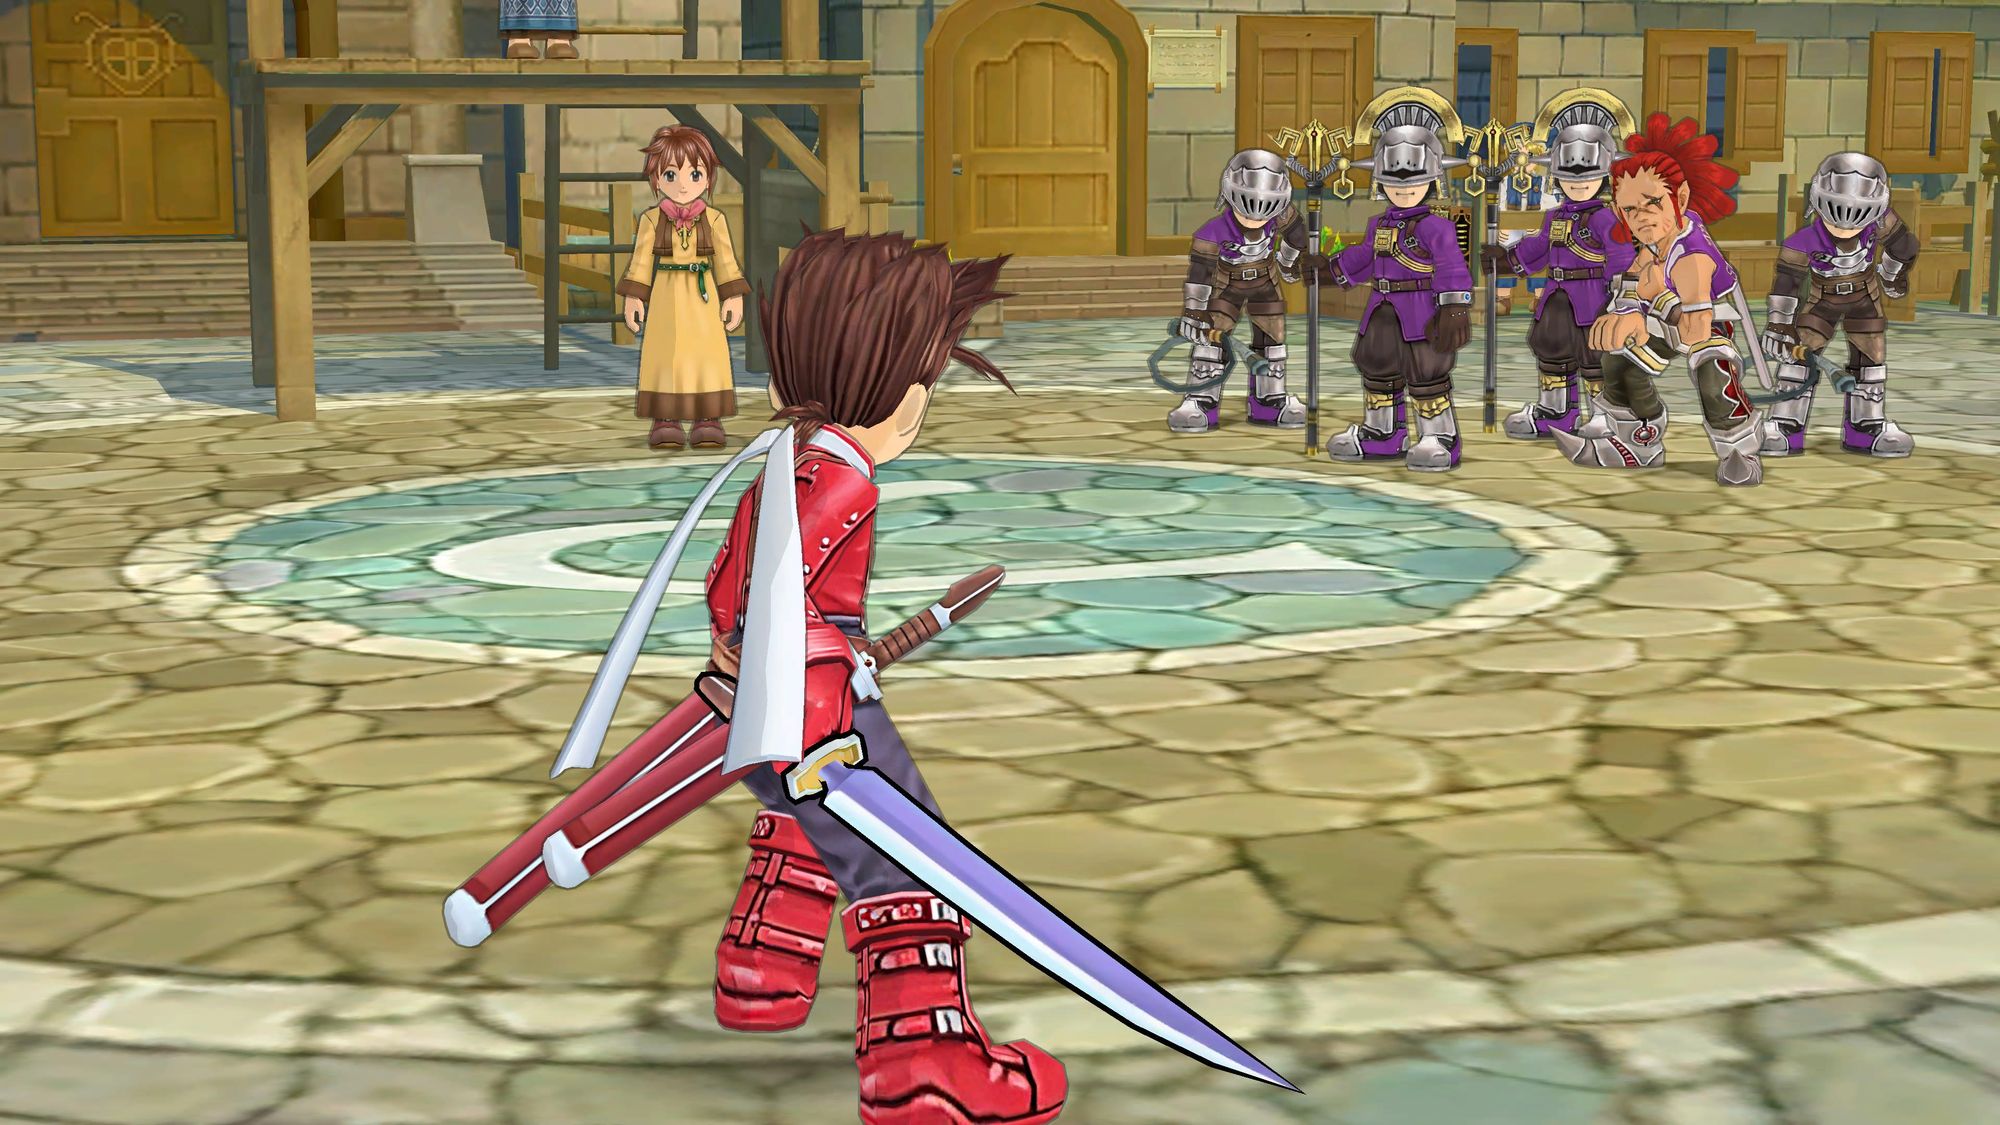 Tales of Symphonia Remastered – Recensione